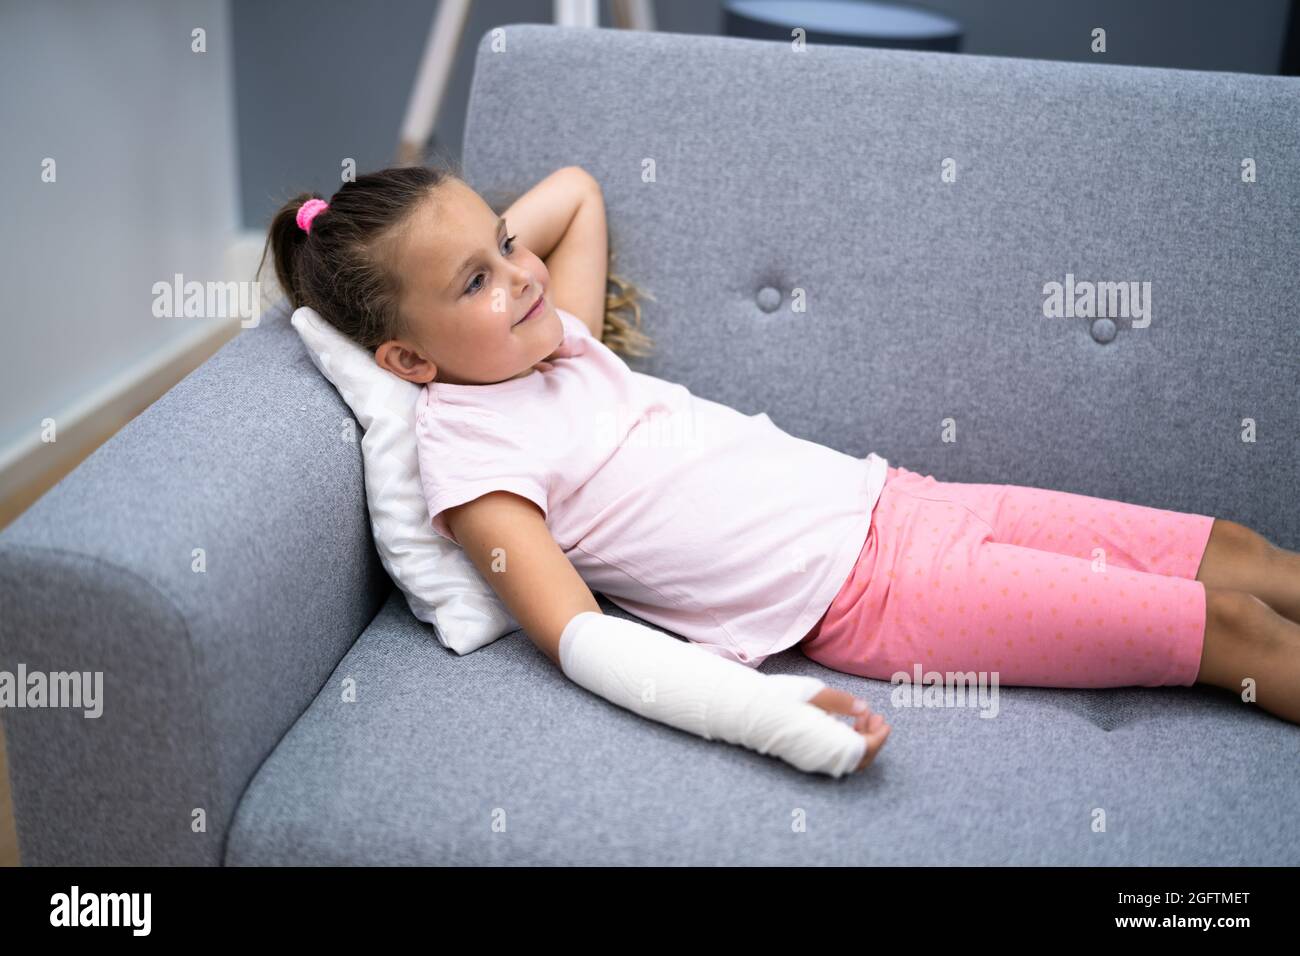 Young Child Girl With Arm Fracture And Cast Stock Photo